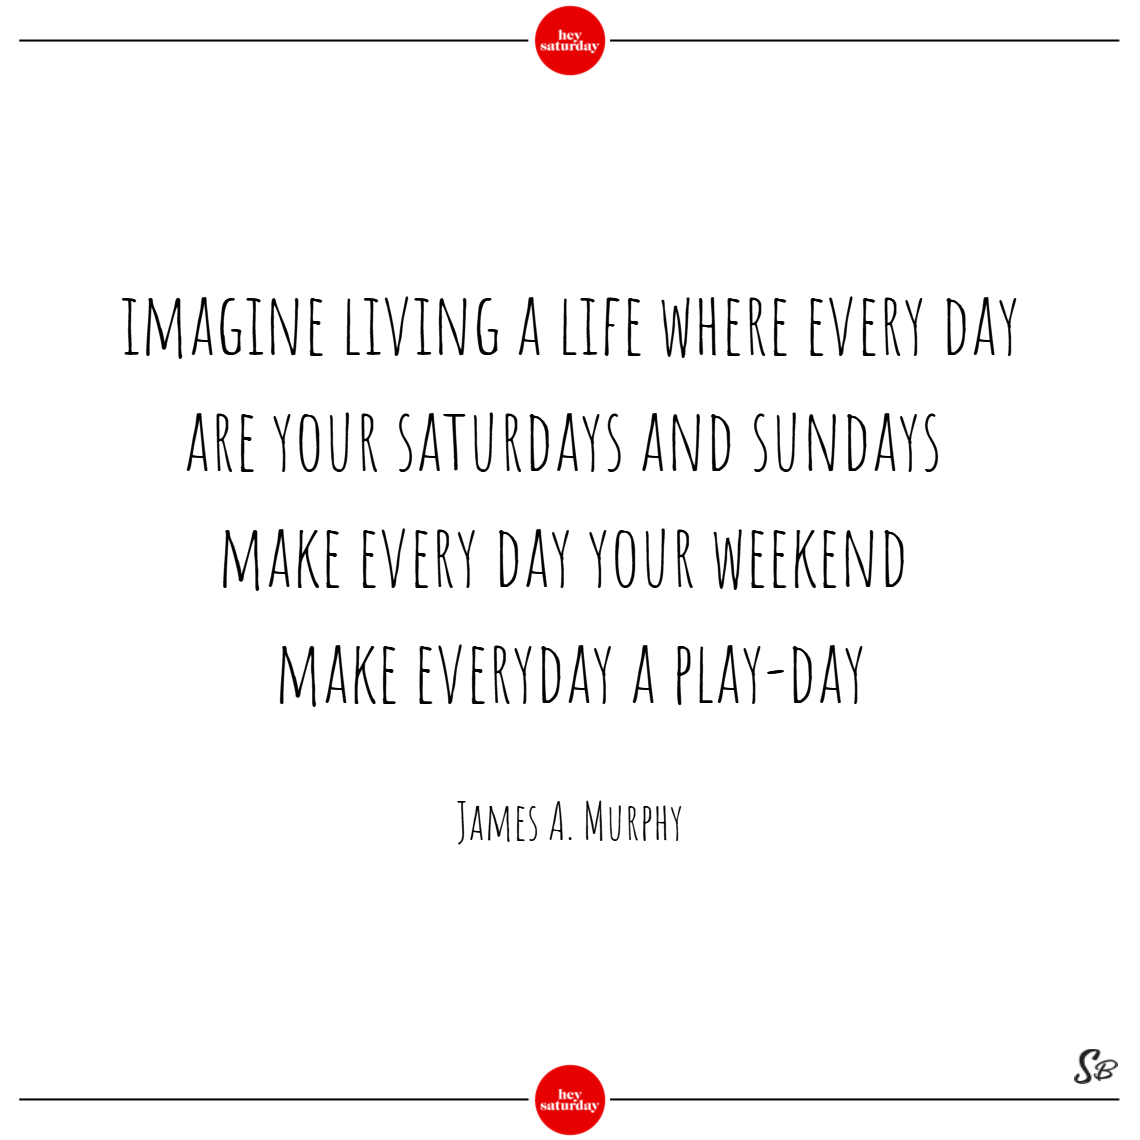 Imagine living a life where every day are your saturdays and sundays. make every day your weekend. make everyday a play day. - james a. murphy saturday quotes